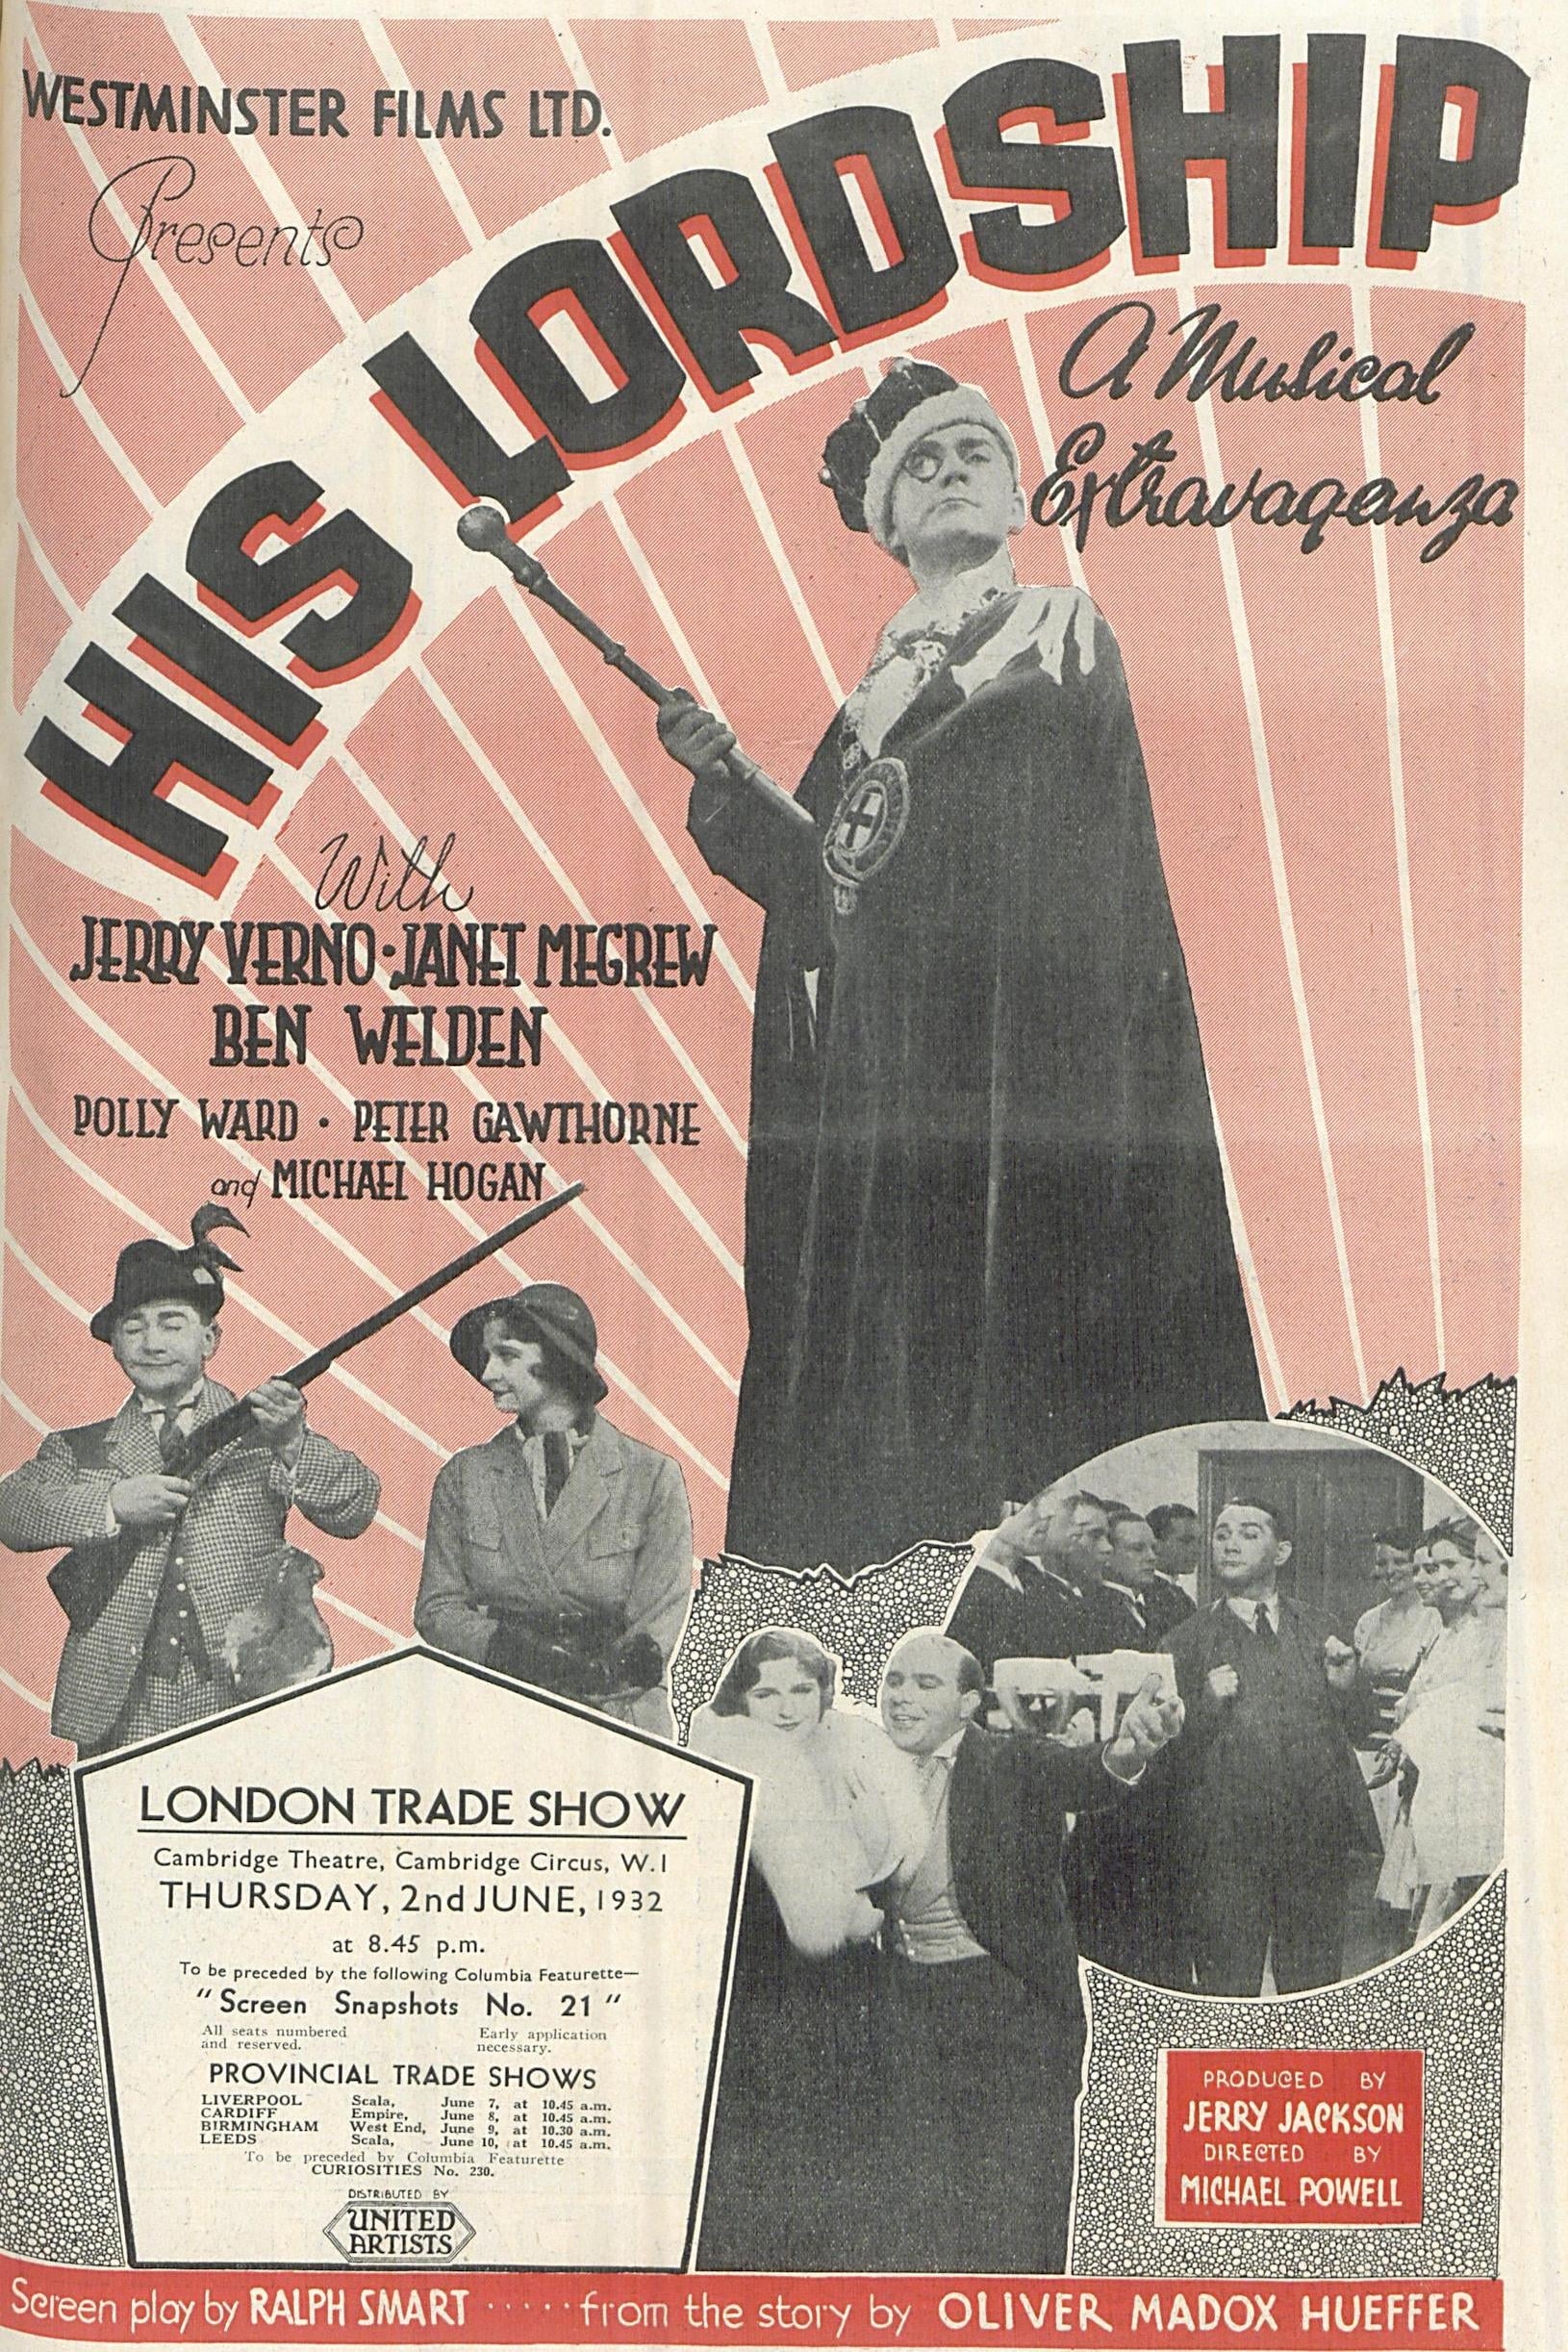 His Lordship (1932)